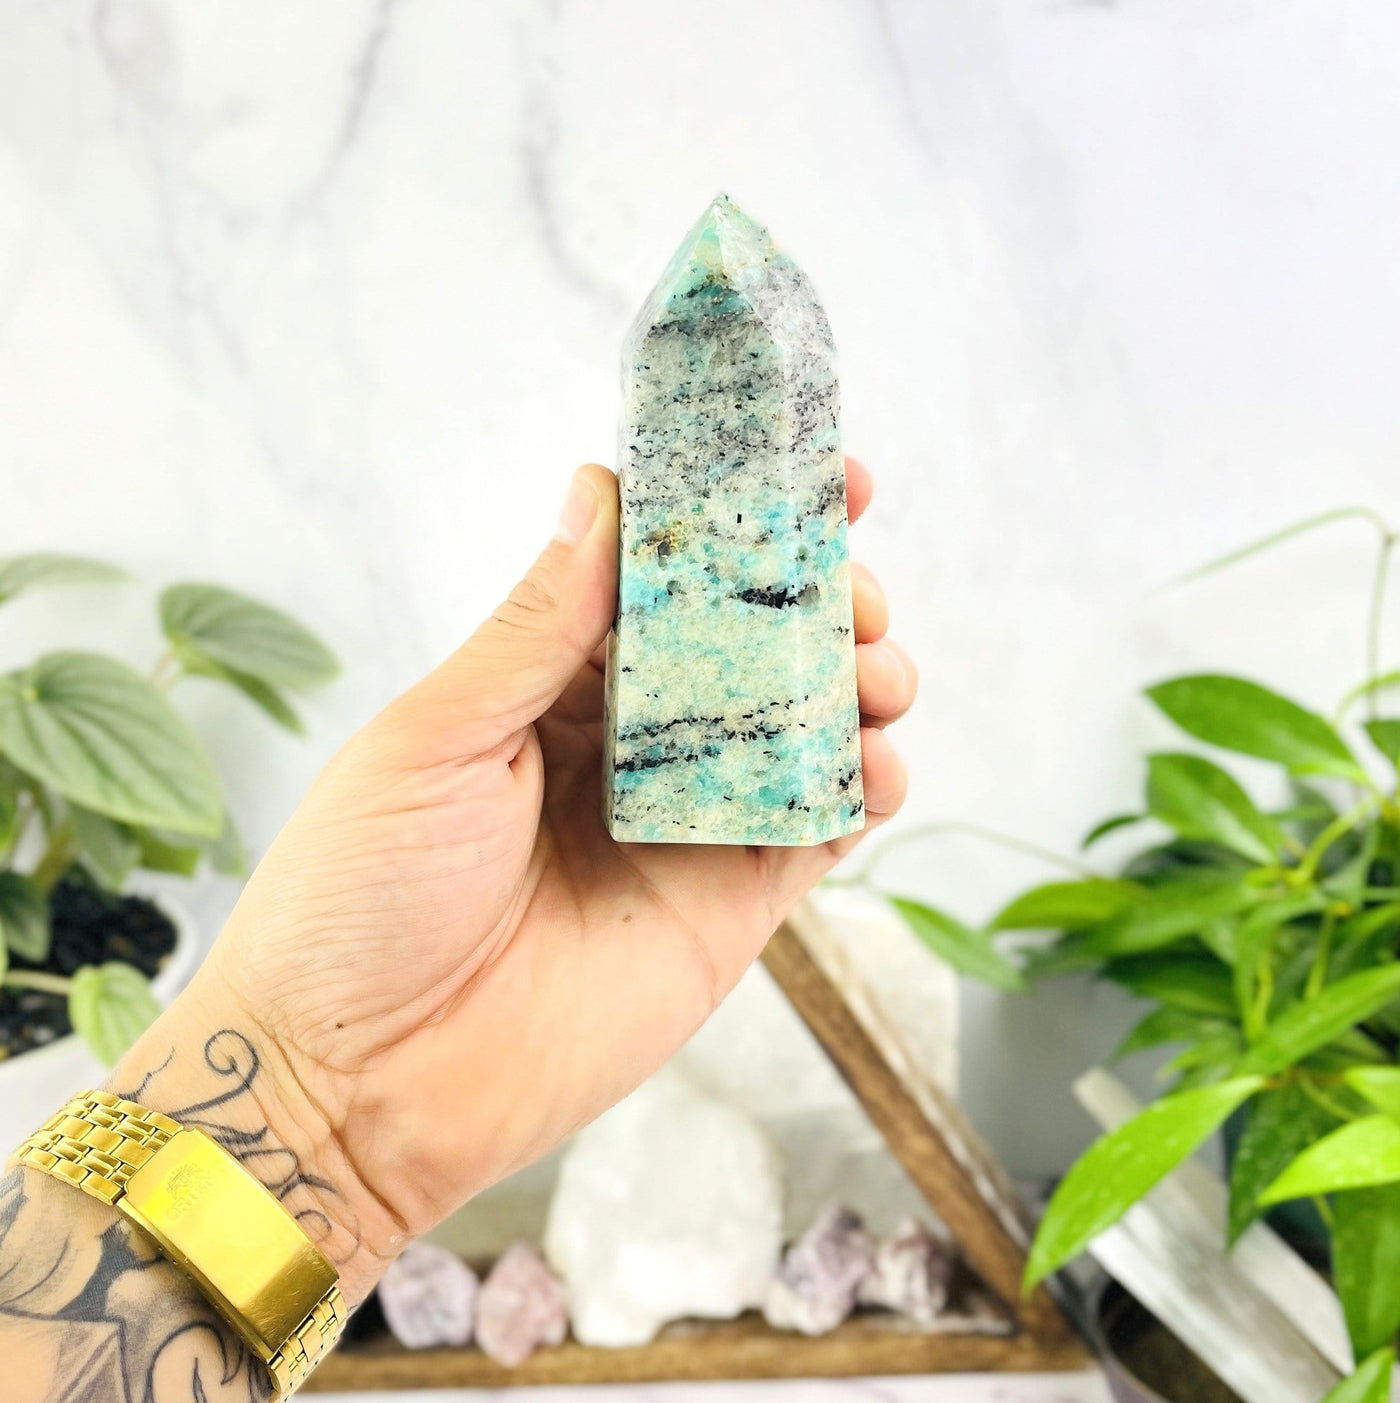 amazonite point being held for size reference.